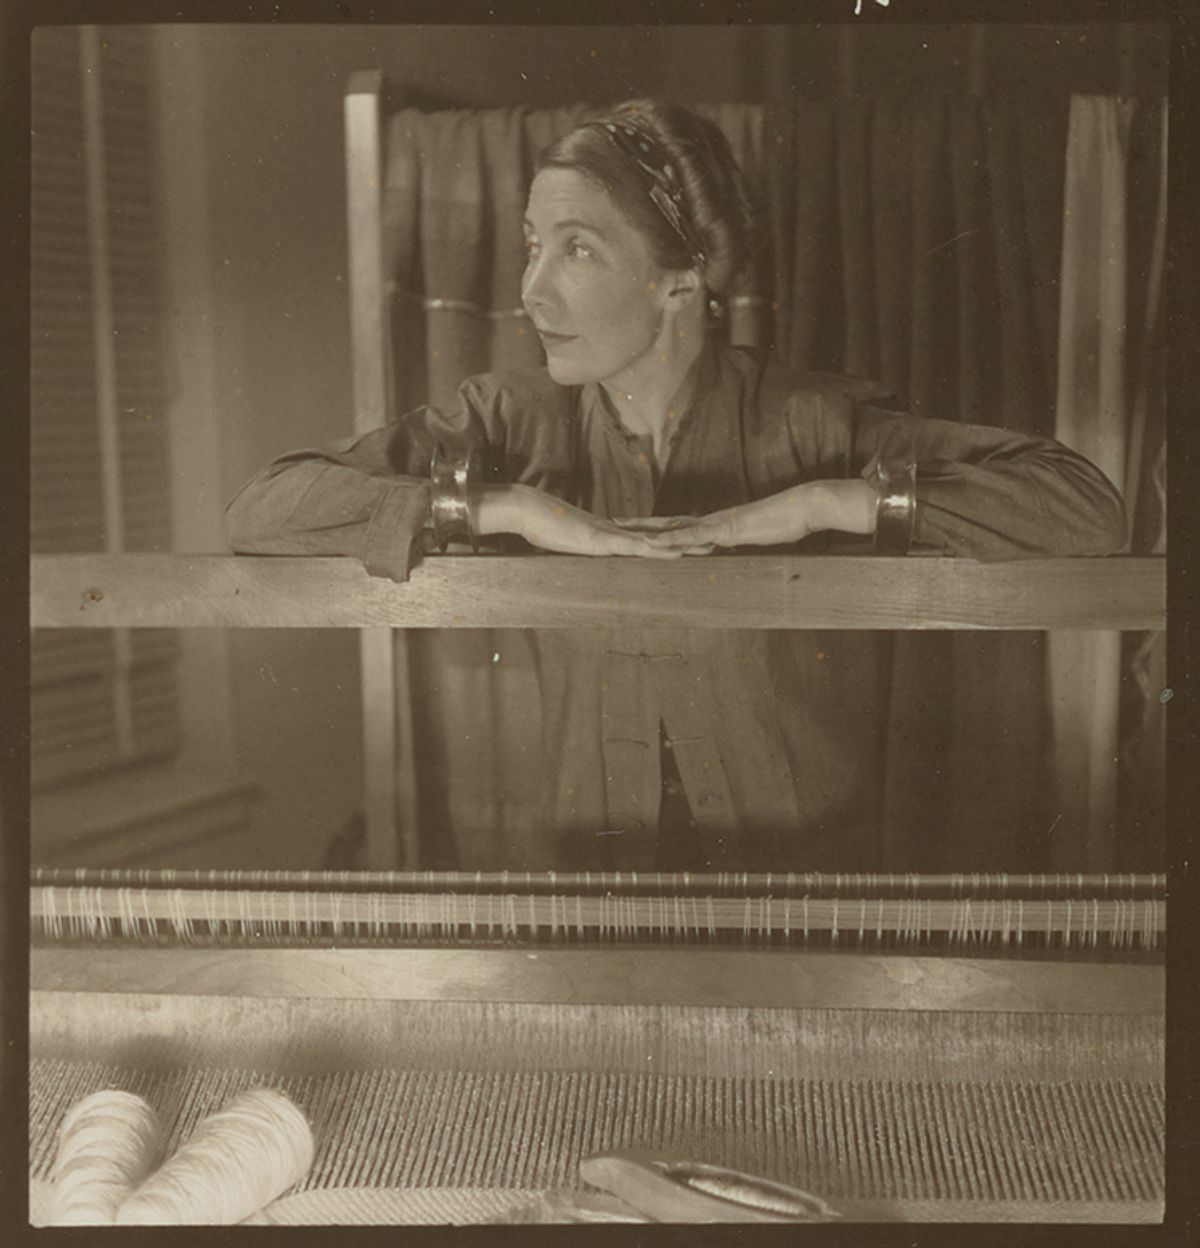 Fashion photographer Louise Dahl-Wolfe’s 1938 shot of Dorothy Liebes in her San Francisco studio © Center for Creative Photography, Arizona Board of Regents